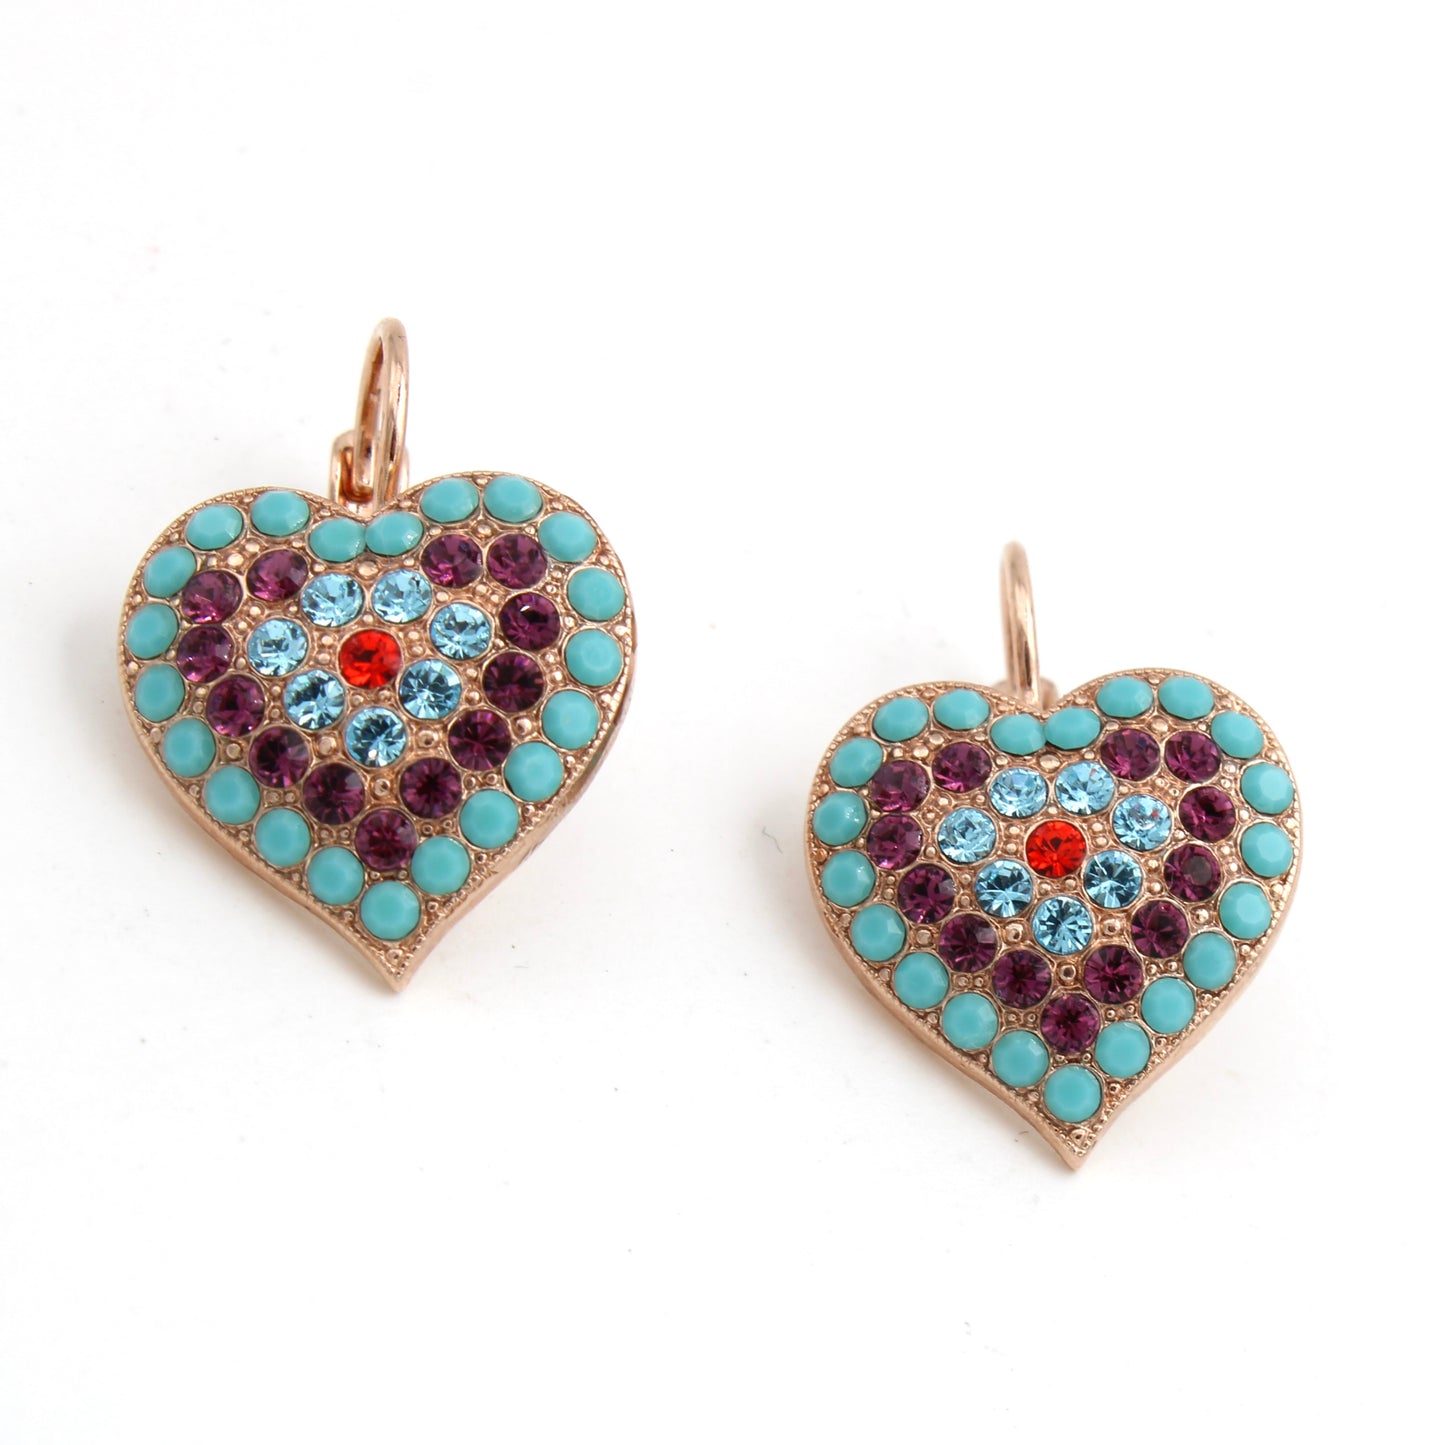 Rainbow Sherbet Collection Heart Earrings in Rose Gold